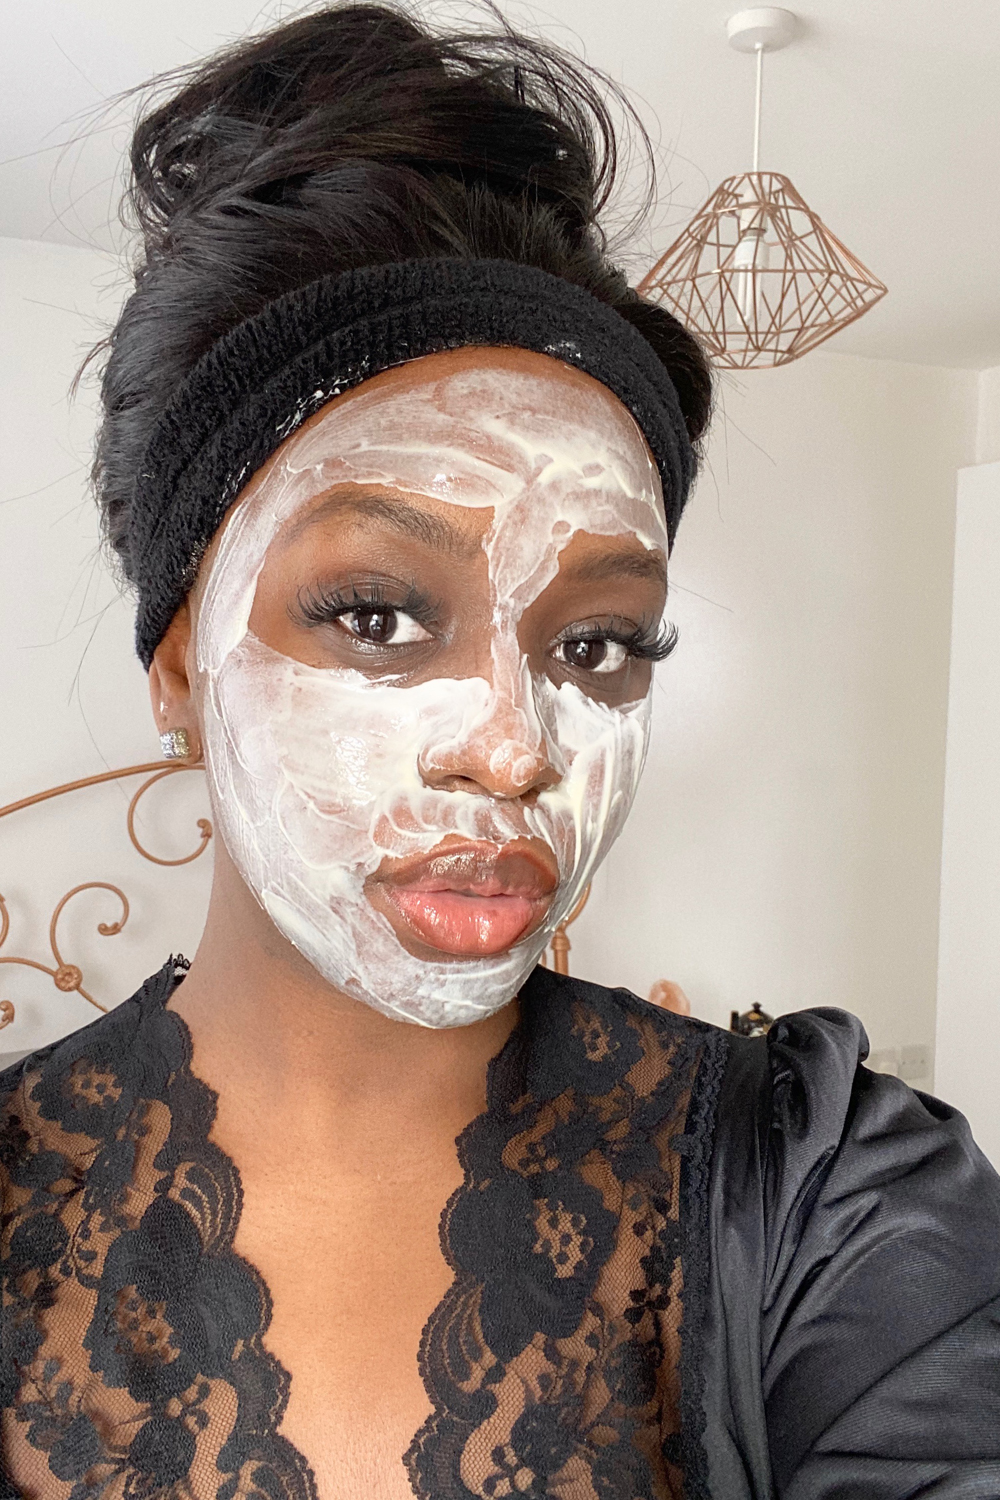 I Just Tried All of the Face Masks Around–These Are the 23 That I Rate